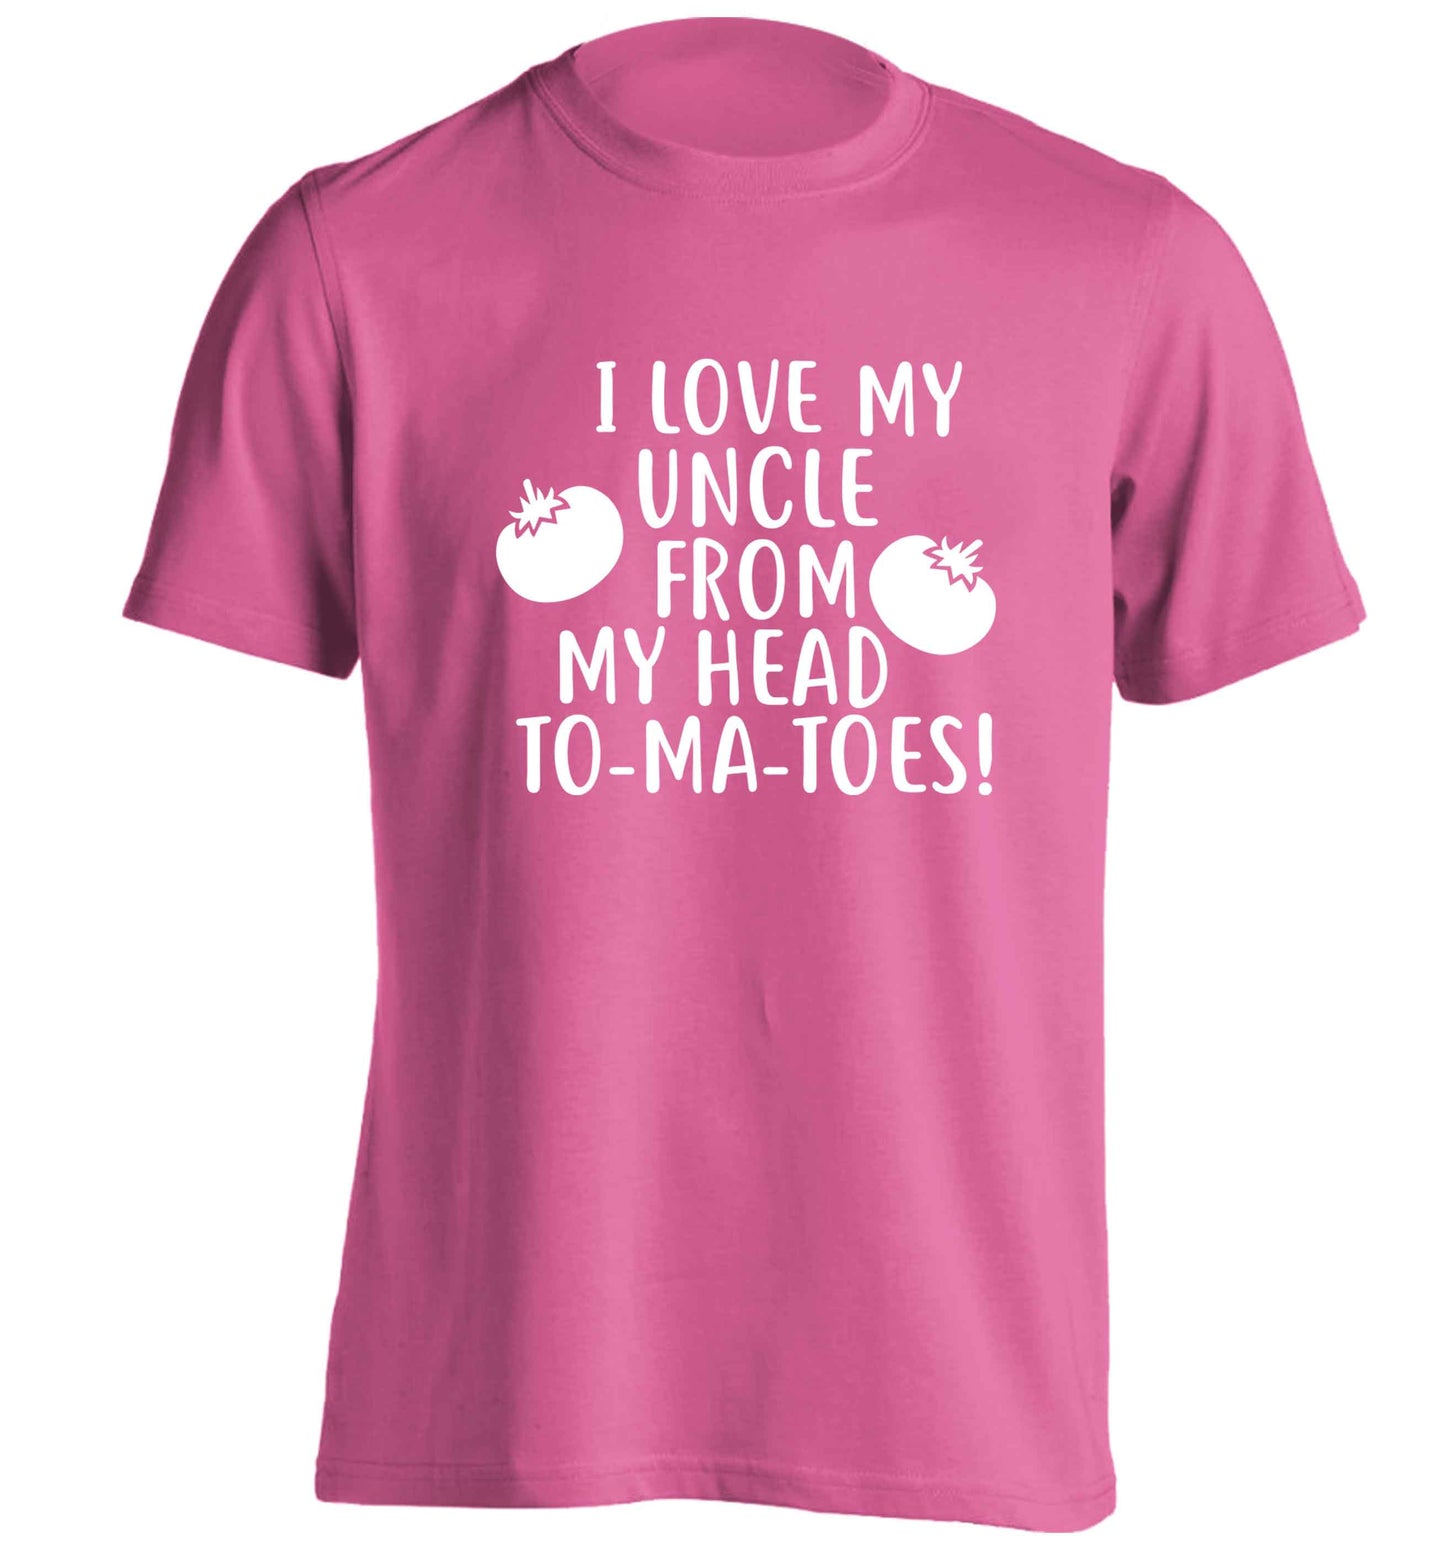 I love my uncle from my head To-Ma-Toes adults unisex pink Tshirt 2XL